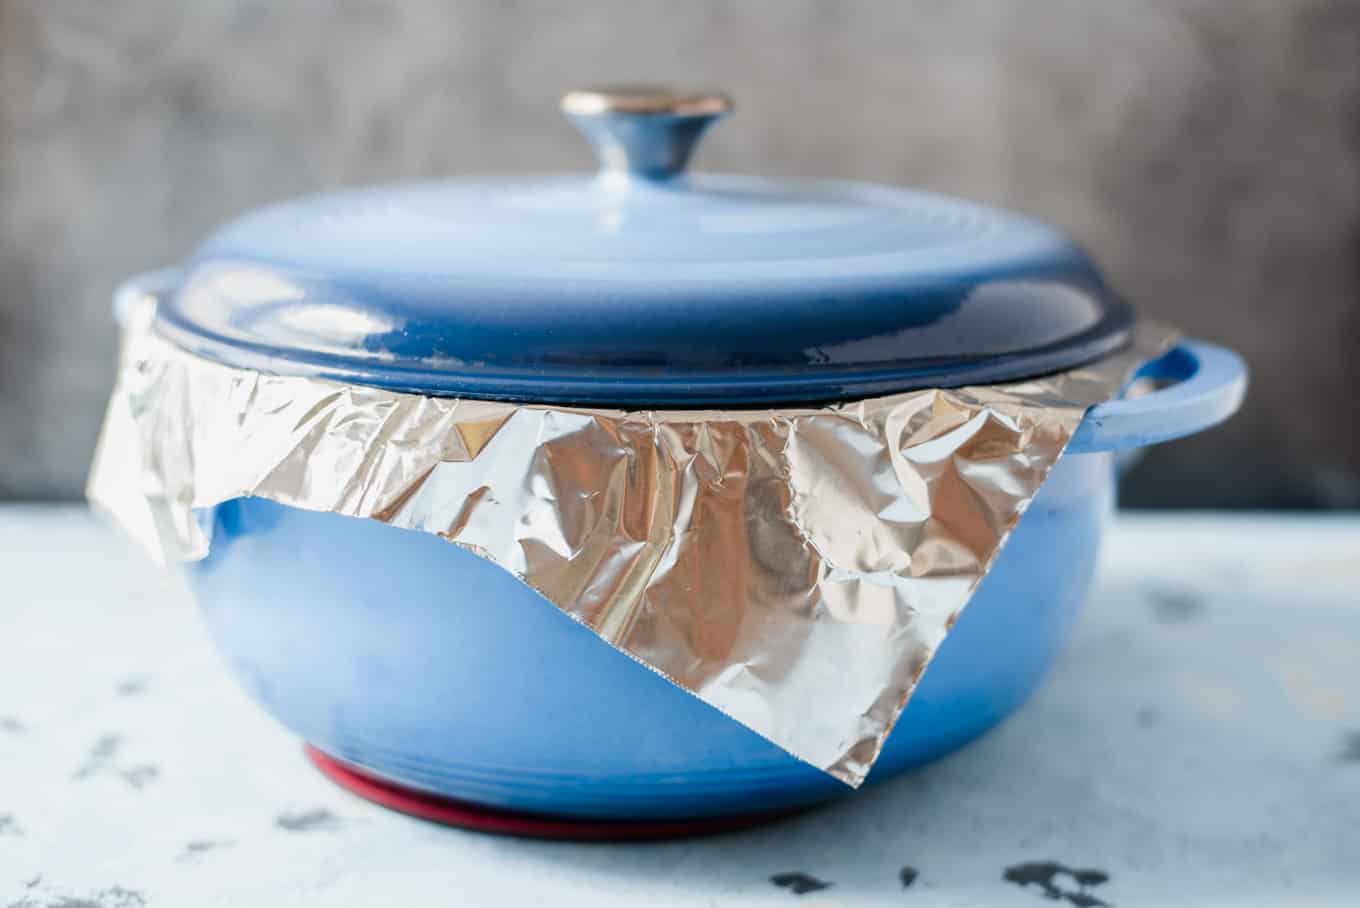 A dutch oven lined with foil and topped with a lid.